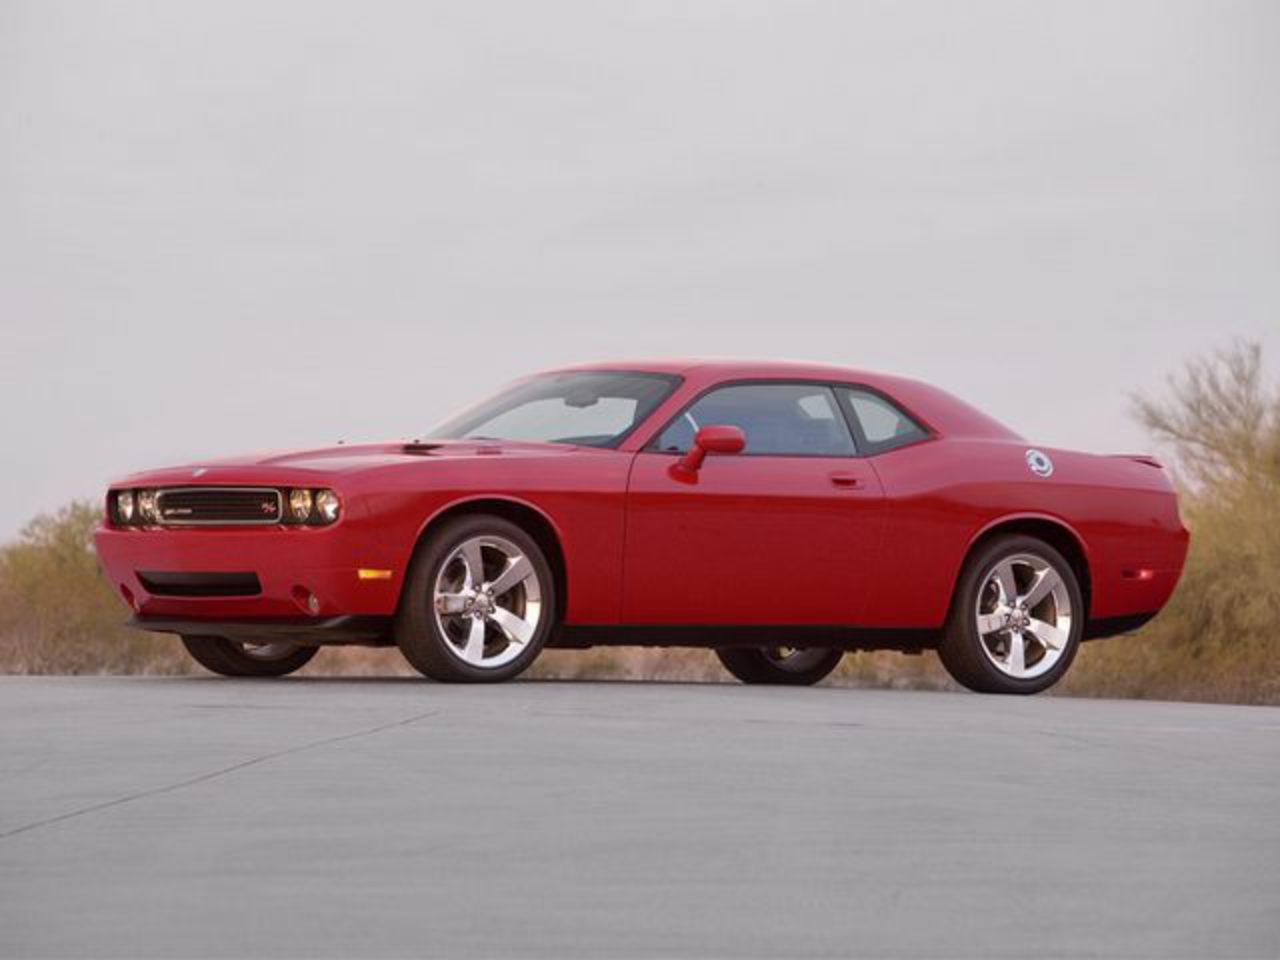 Dodge Challenger 2009 Coupe. 17977.00 $